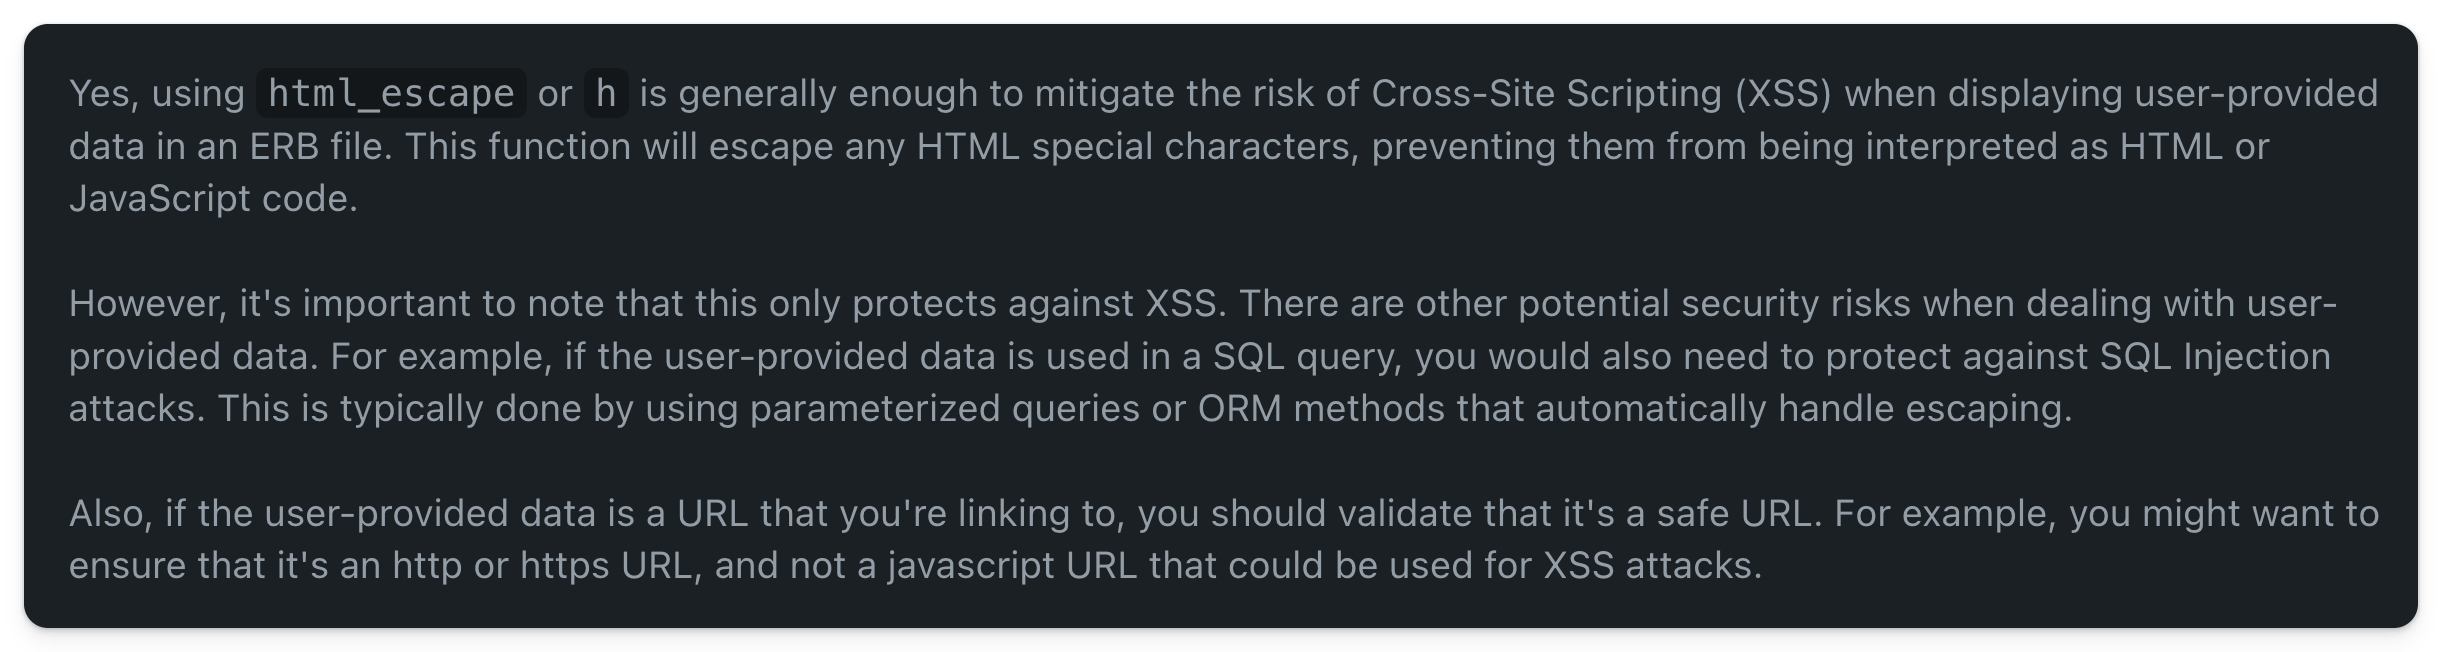 GPT4 response about using html_escape